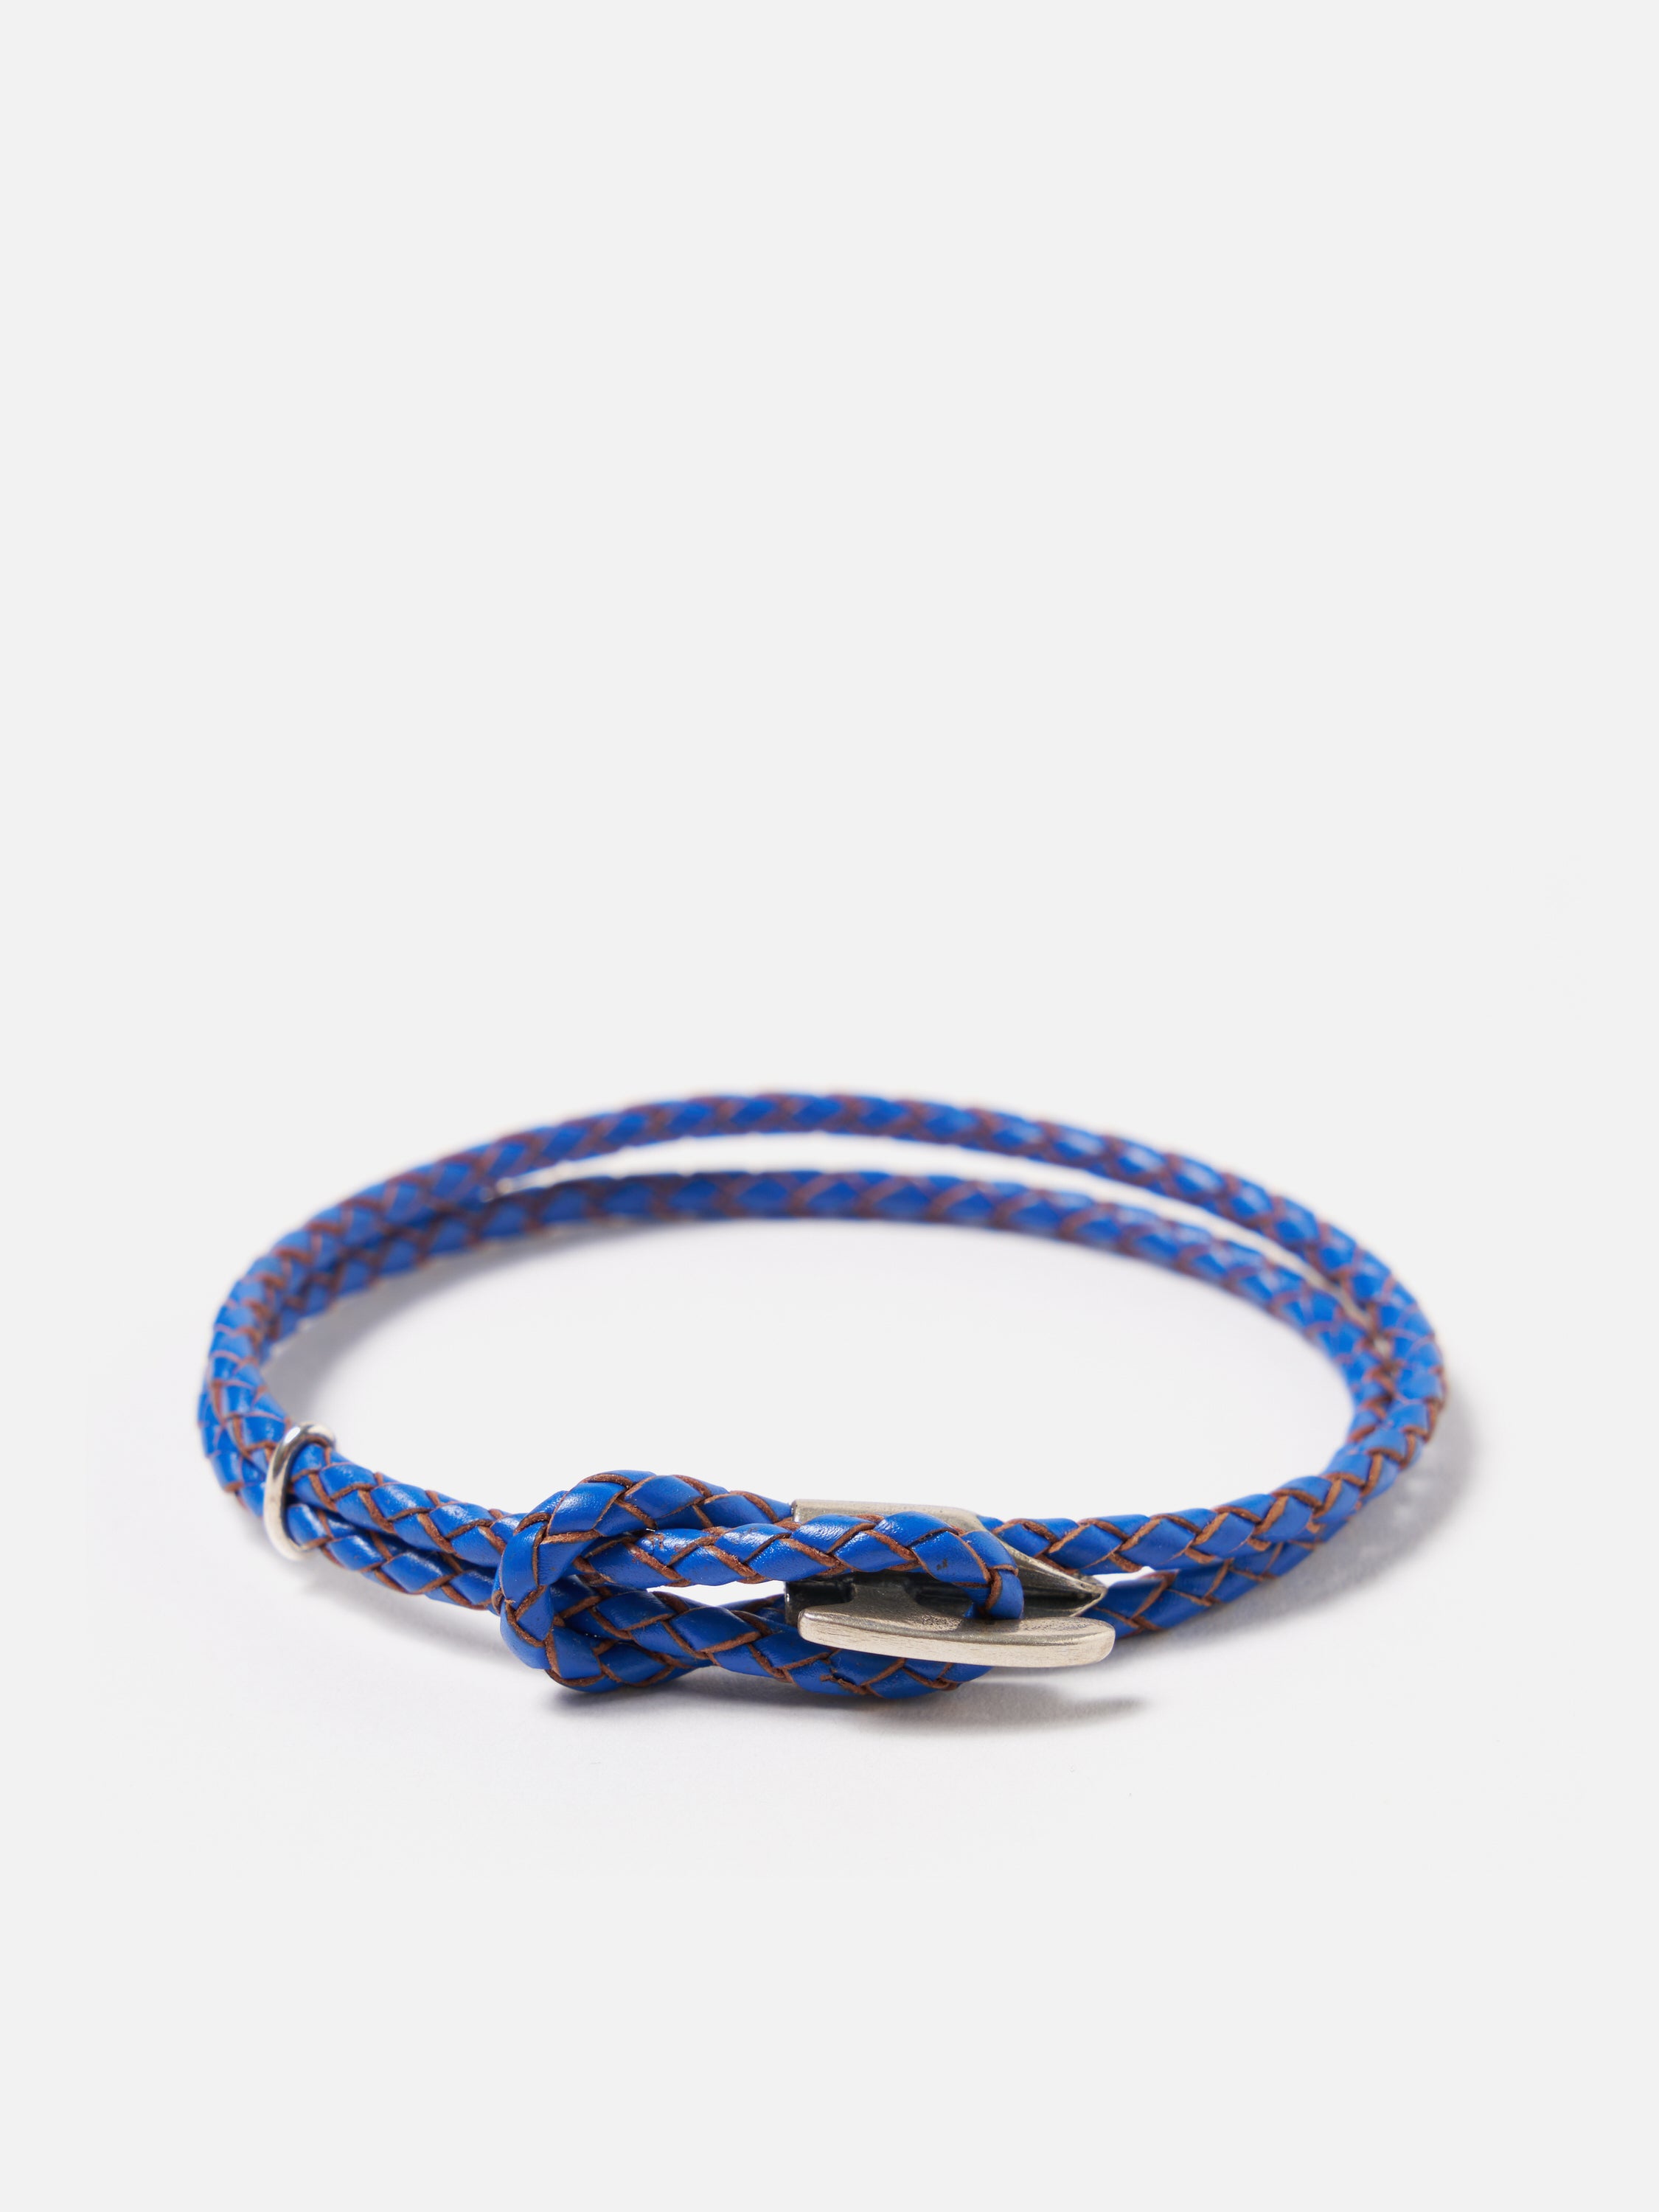 Anchor & Crew Padstow Bracelet in Royal Blue .925 Silver/Braided Leather